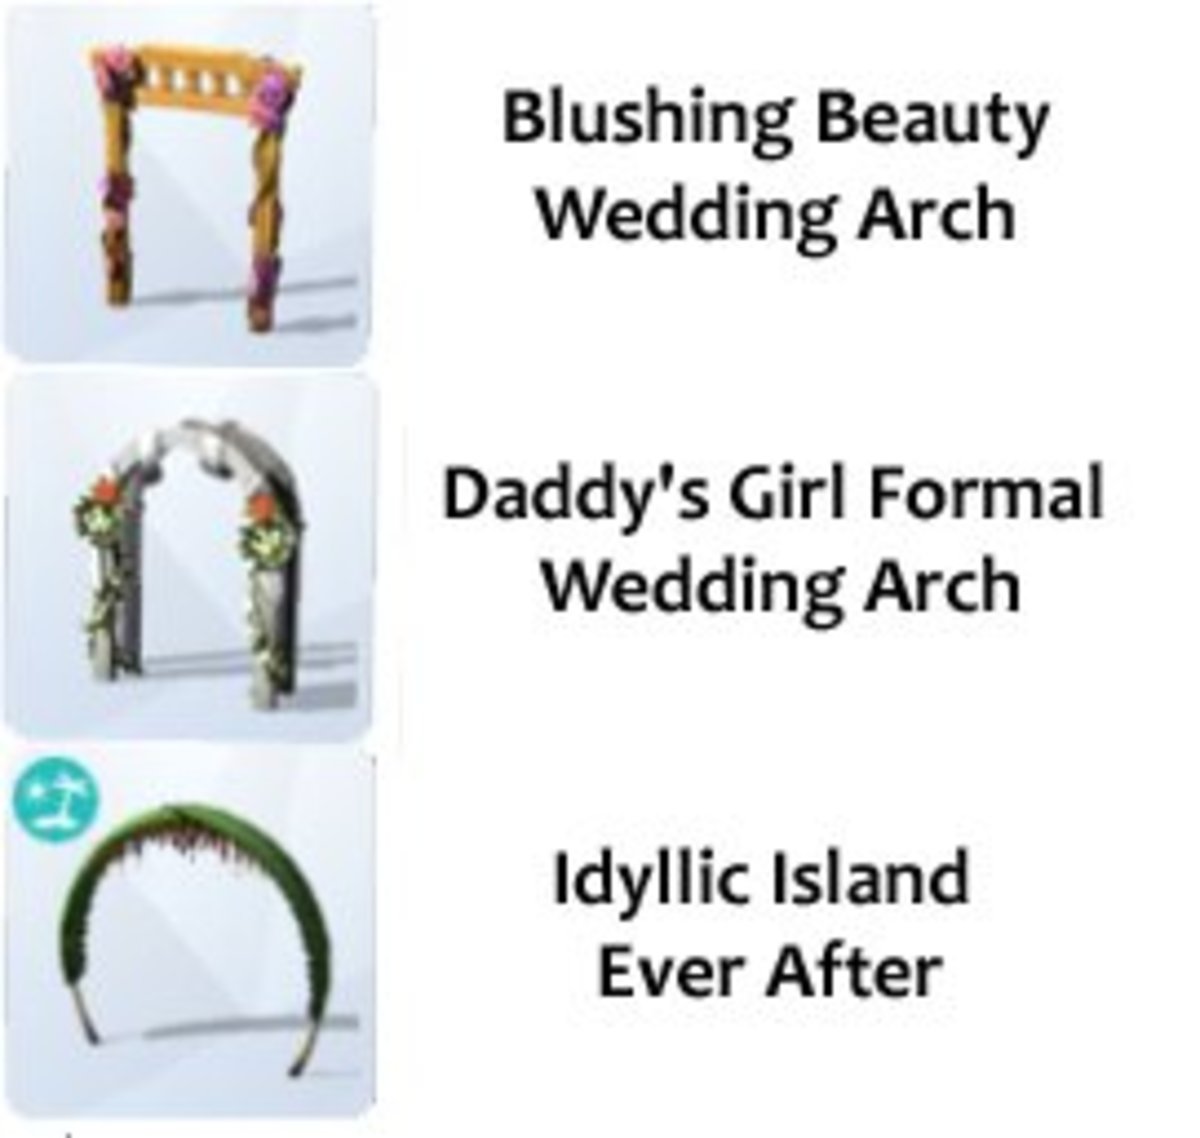 You can select from these three wedding arches. Each comes in a variety of colors. 